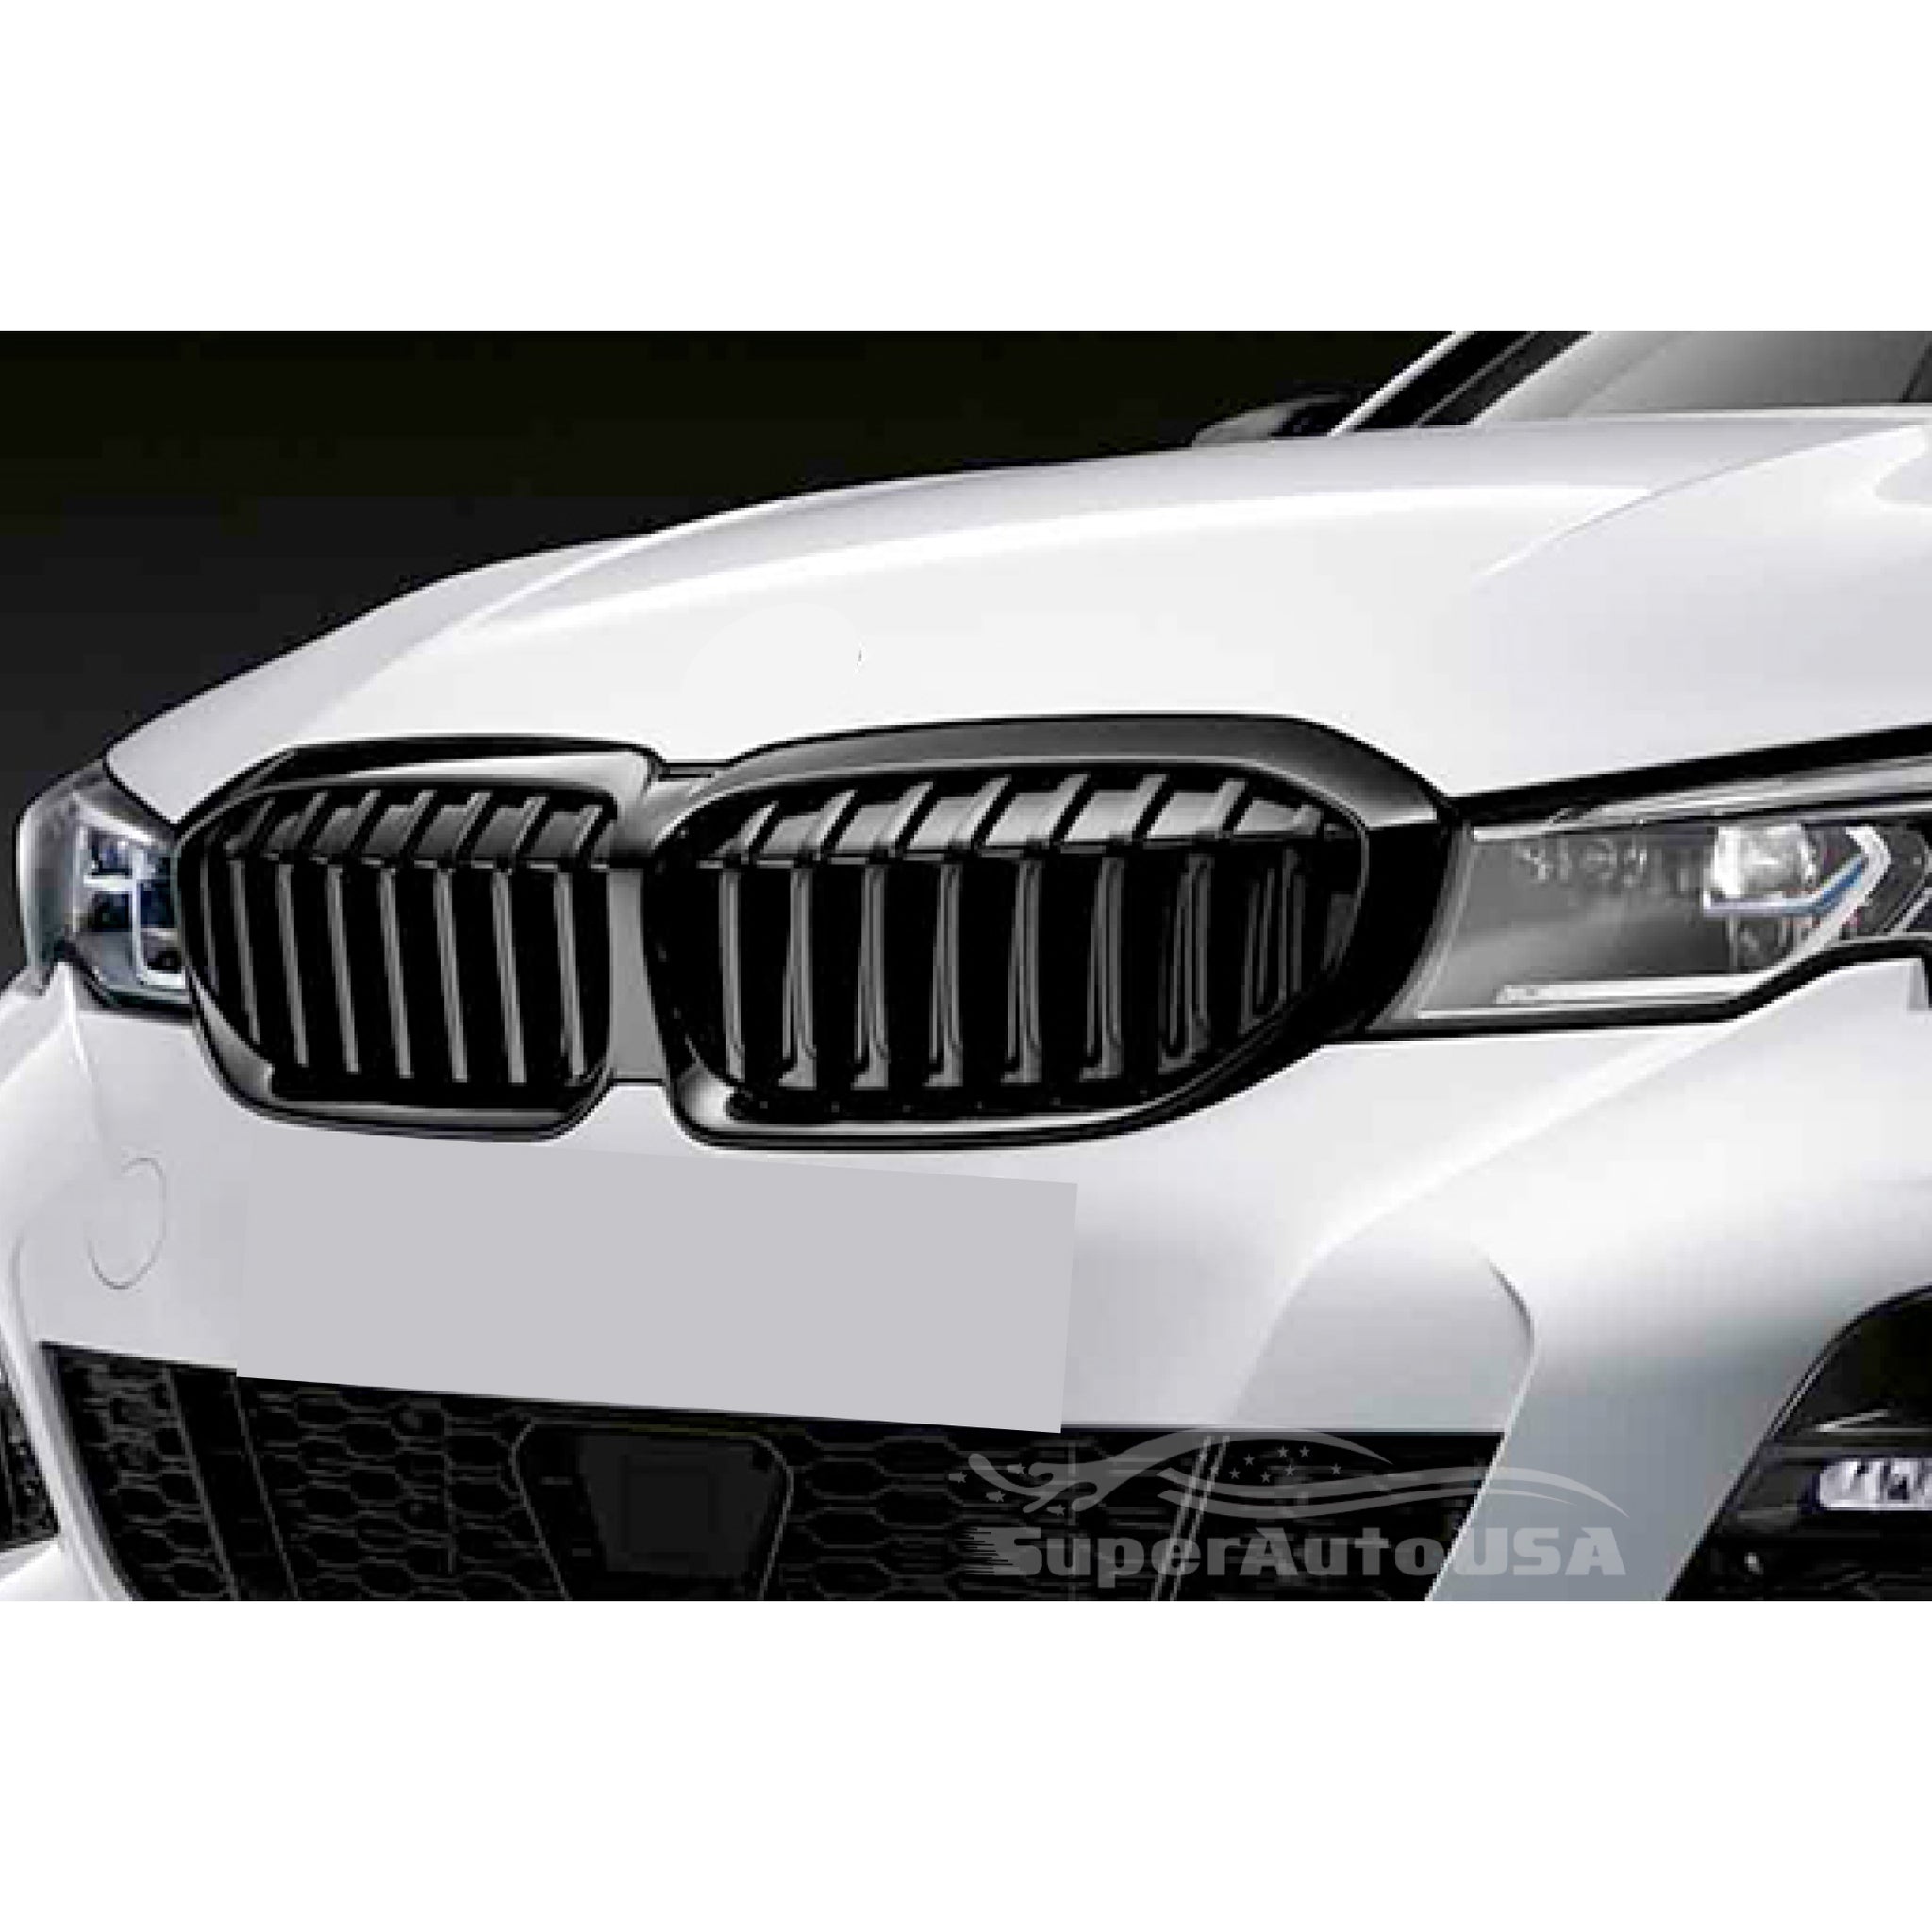 zoon Beweging Fysica Fits 2019-2021 BMW 3 Series G20 G21 Single Line Front Kidney Grill |  SuperAutoUSA